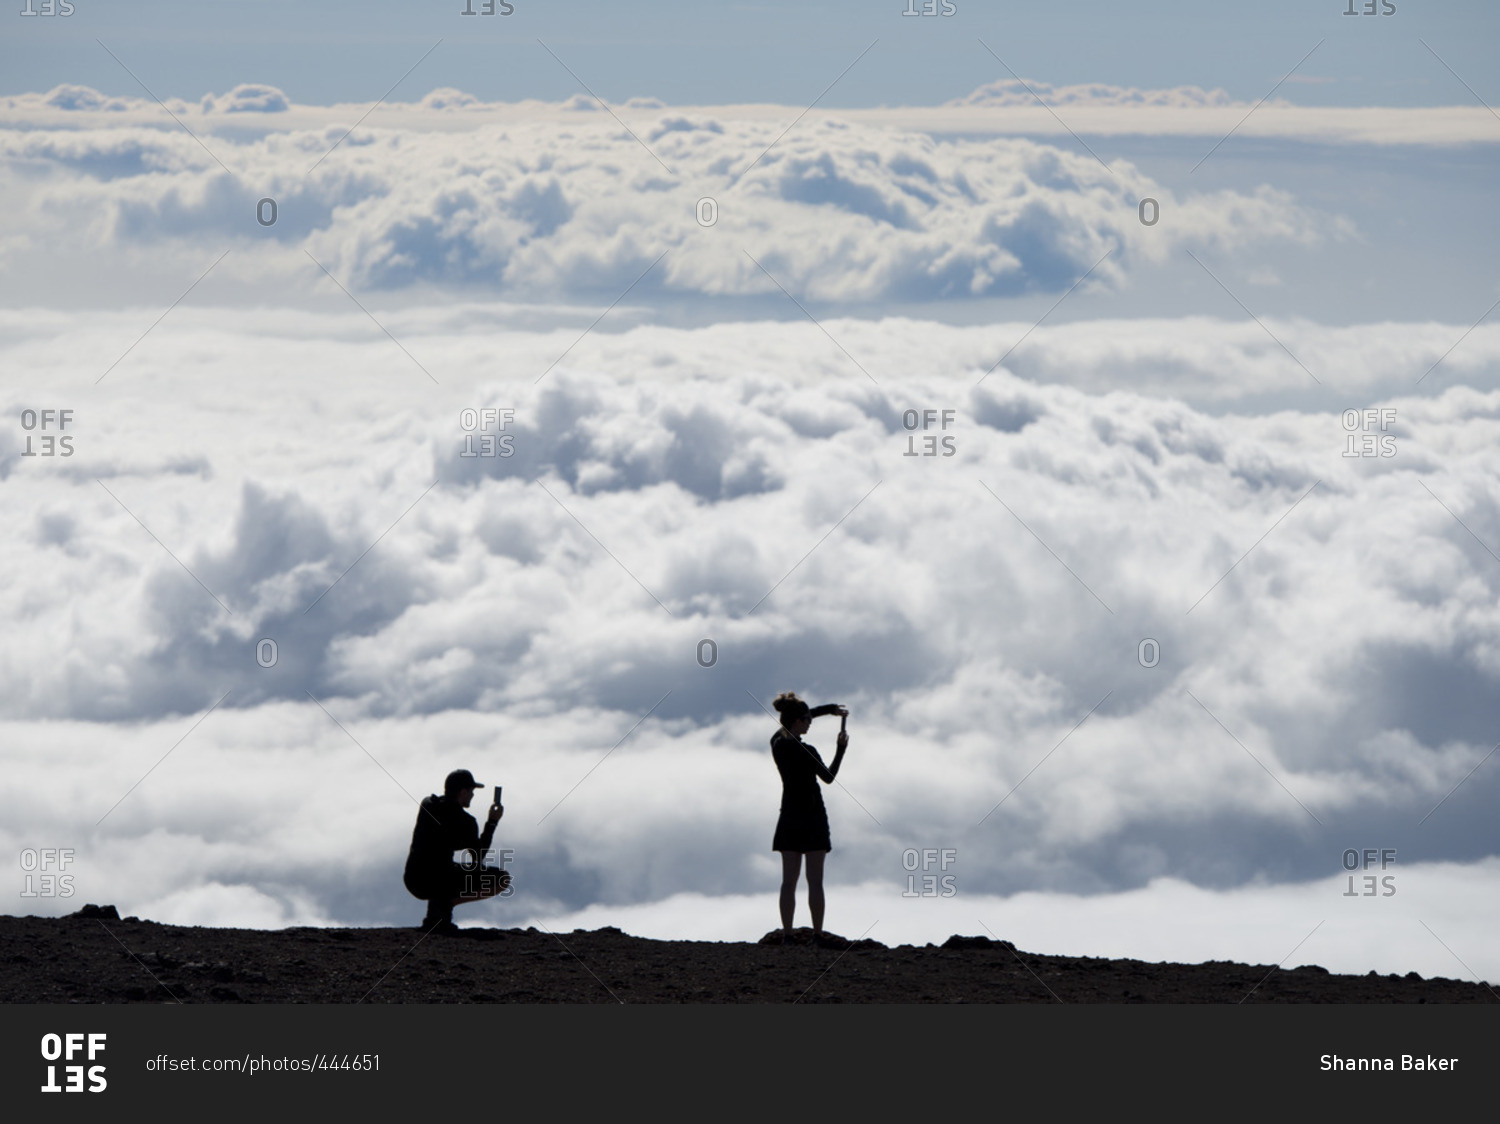 People silhouetted against the clouds at a lookout point in Haleakala National Park, Maui, Hawaii